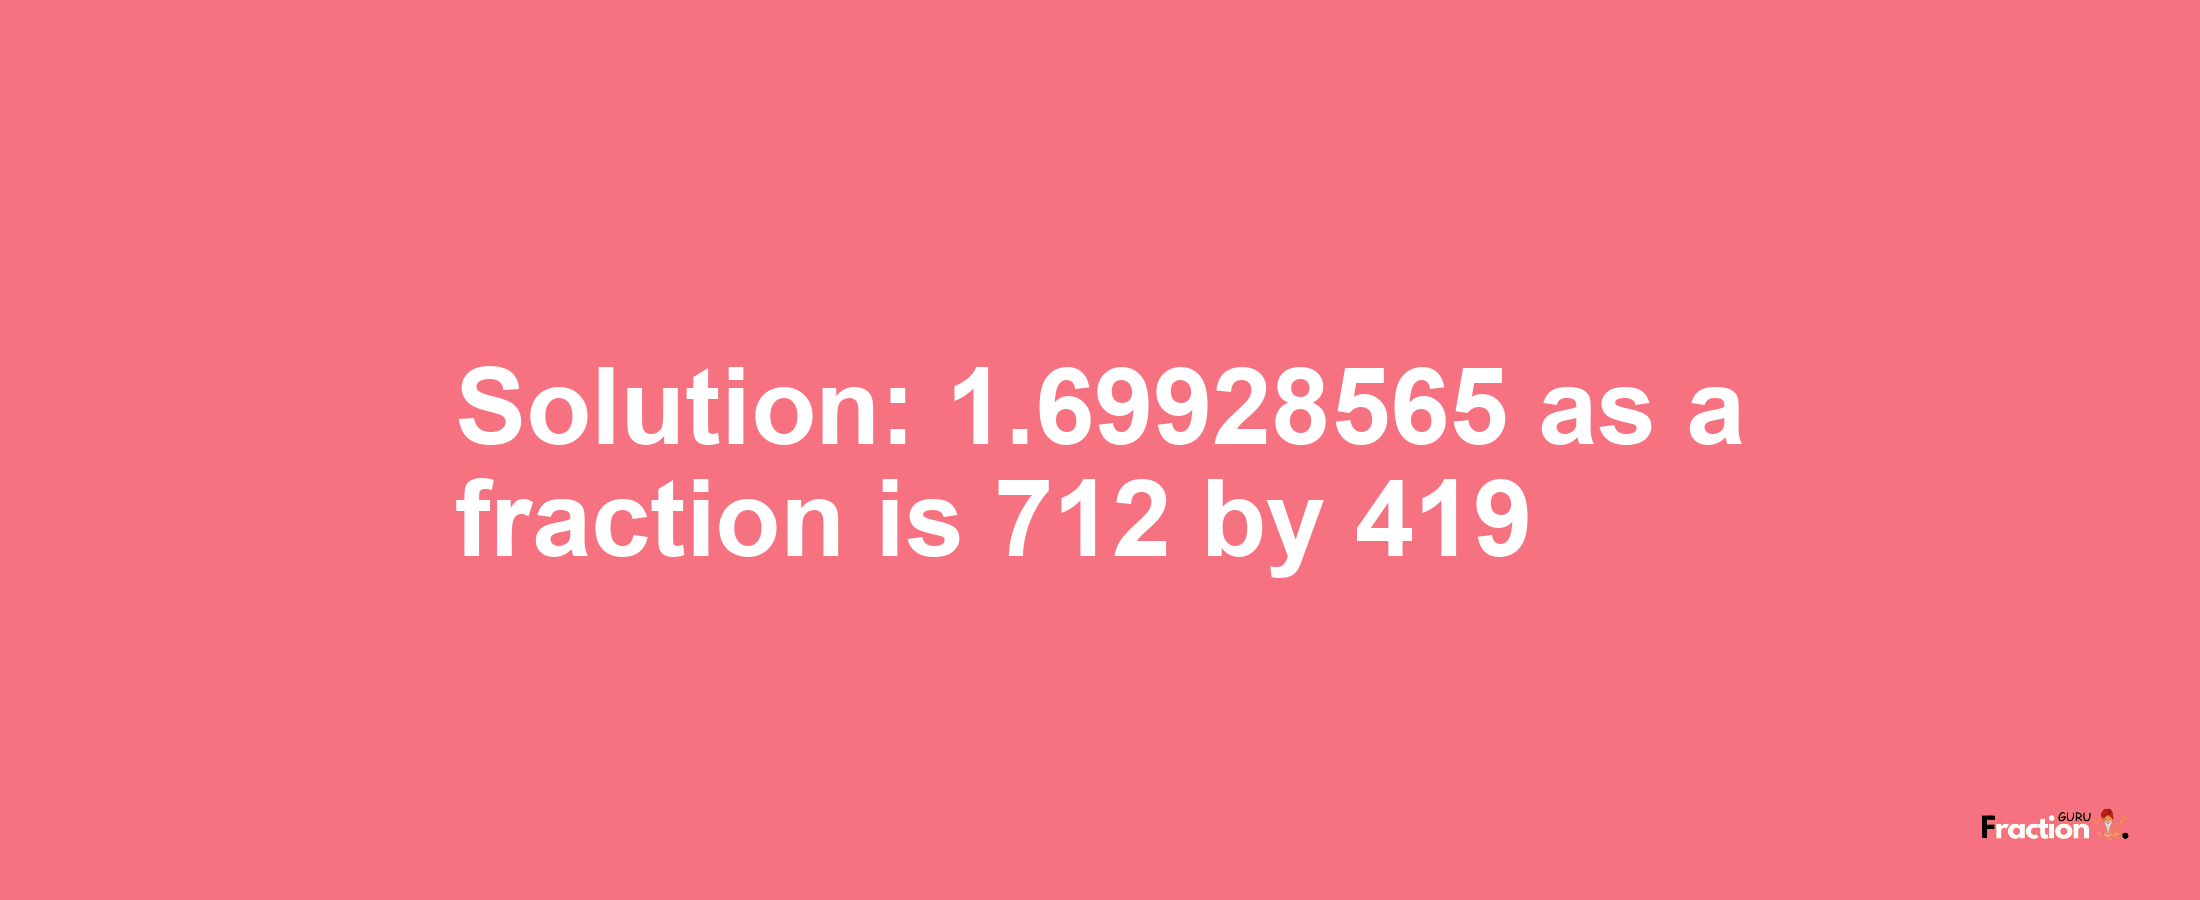 Solution:1.69928565 as a fraction is 712/419